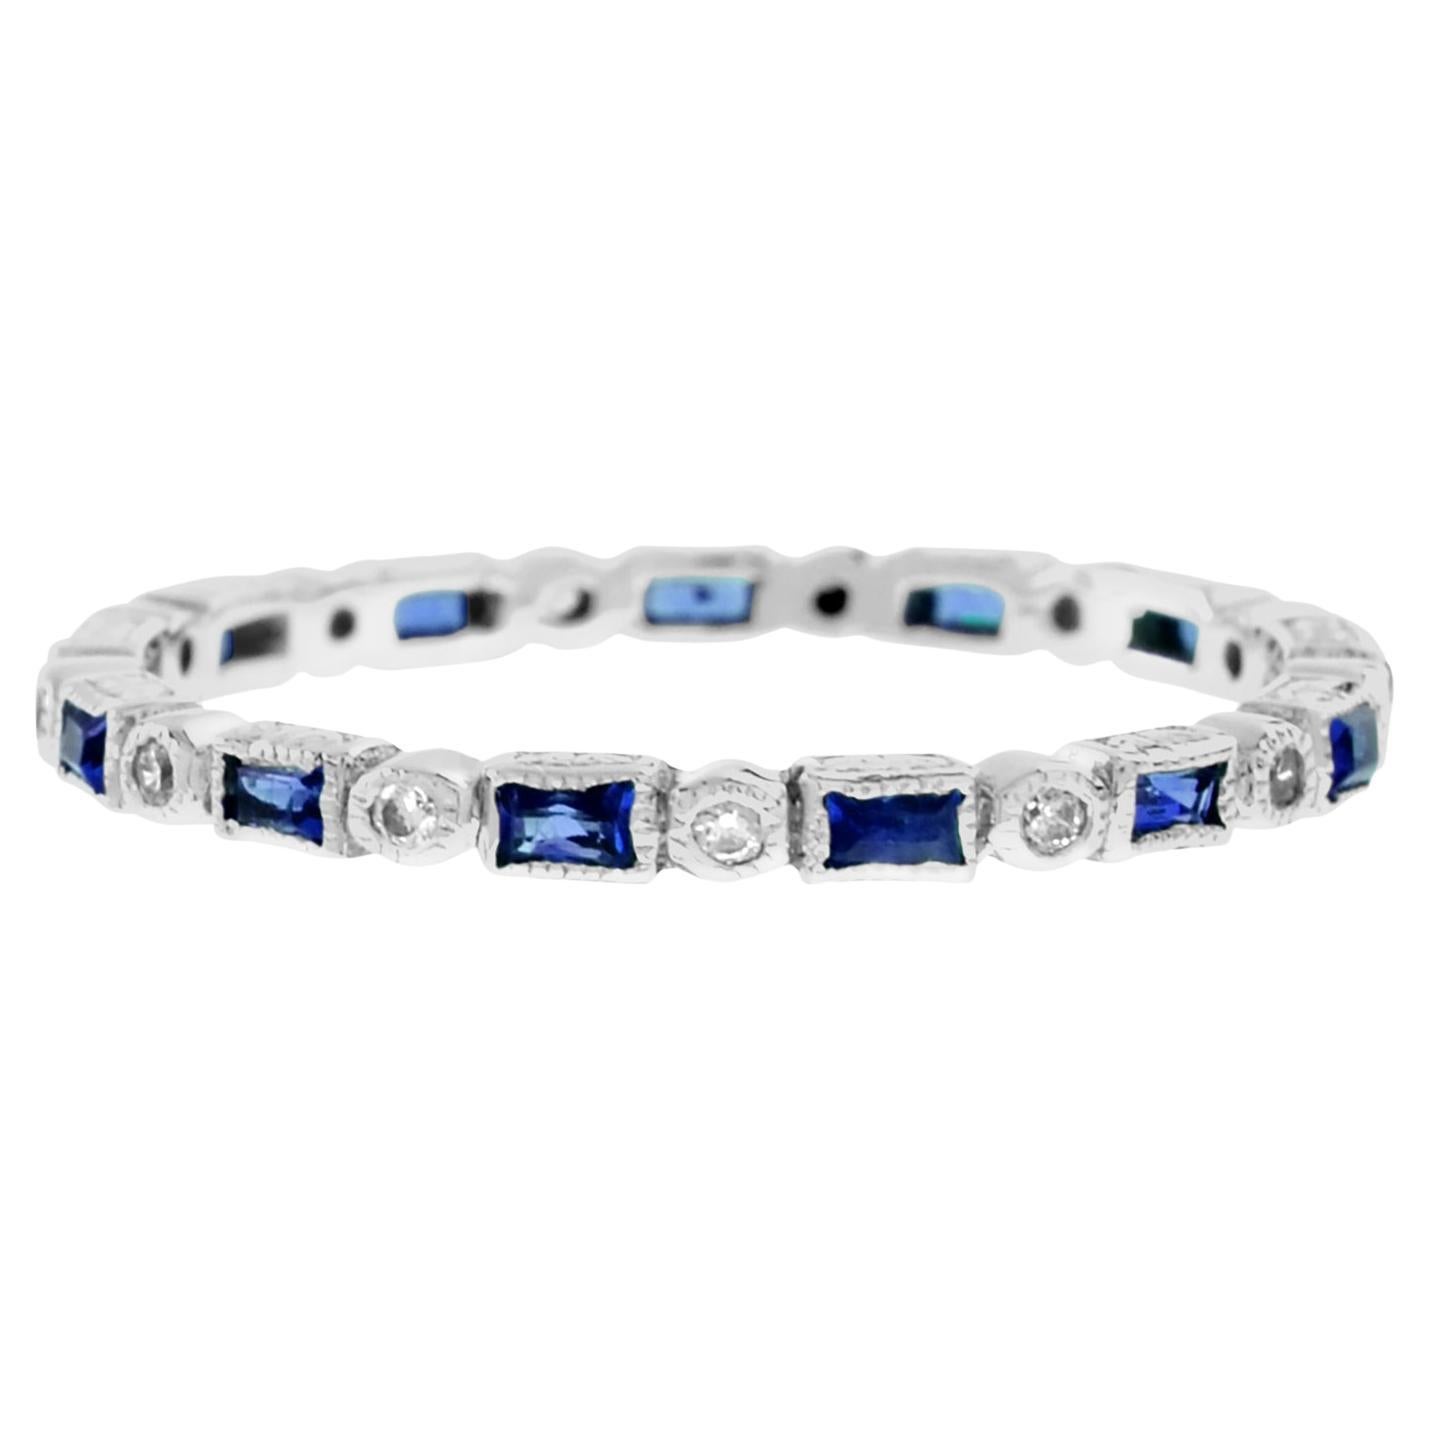 For Sale:  Alternate Sapphire and Diamond Art Deco Style Eternity Ring in 14K White Gold